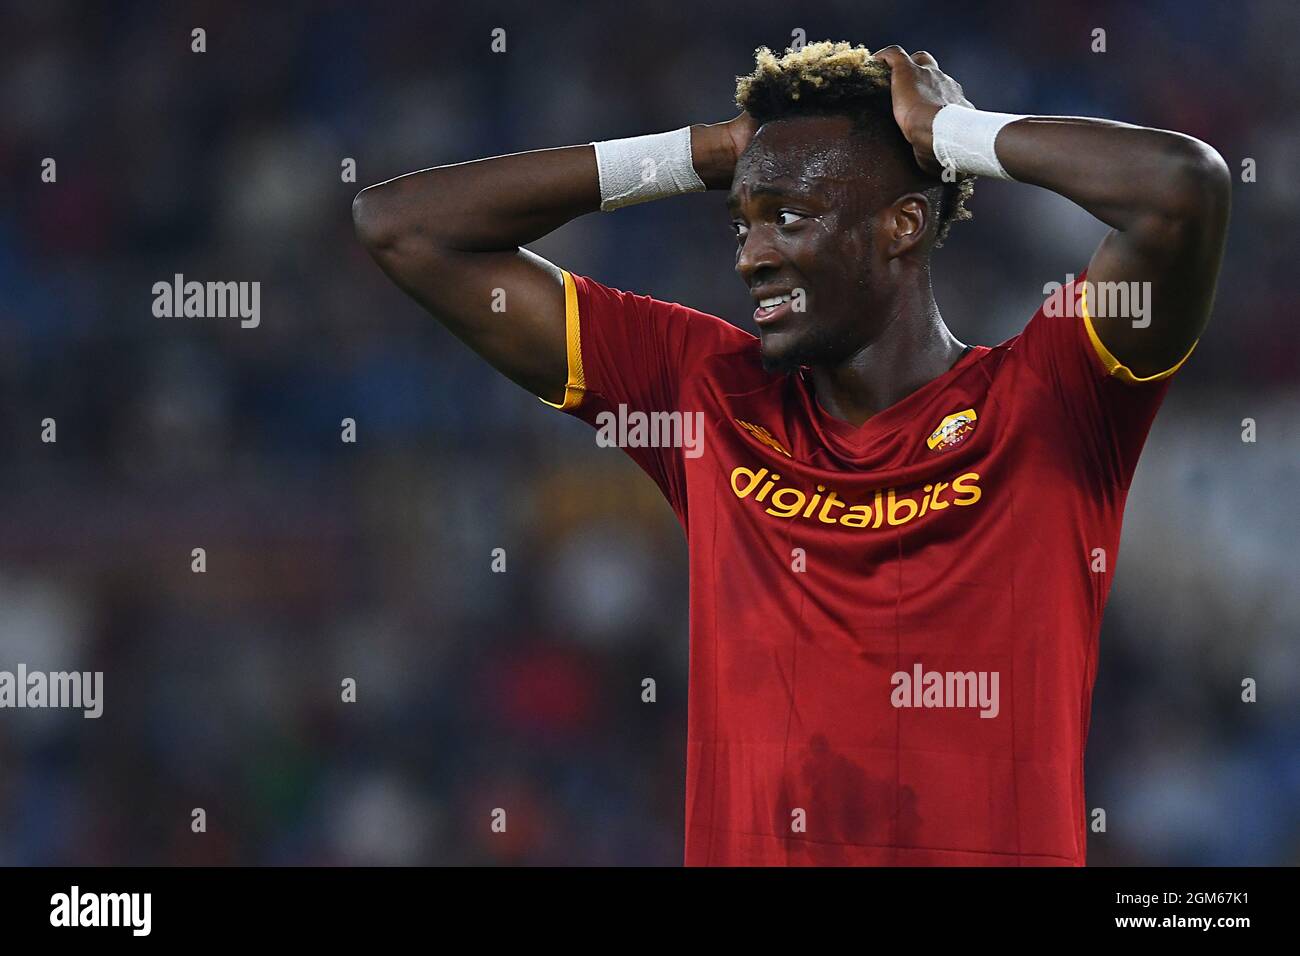 Rome, Lazio. 16th Sep, 2021. Tammy Abraham of AS Roma during the Conference League match between AS Roma v CSKA Sofia at Olimpico stadium in Rome, Italy, September 16, 2021. Fotografo01 Credit: Independent Photo Agency/Alamy Live News Stock Photo